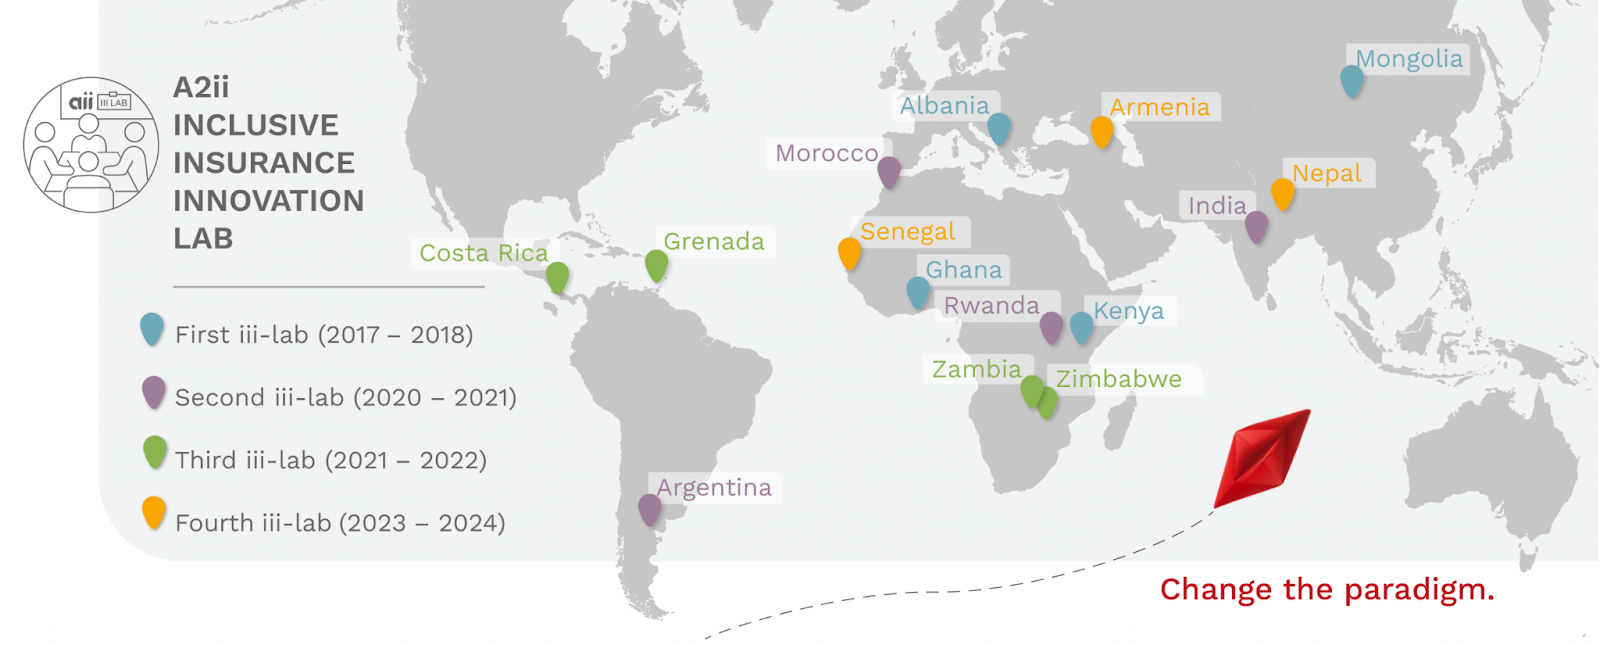 A map highlighting the countries that have participated in iii-labs so far.